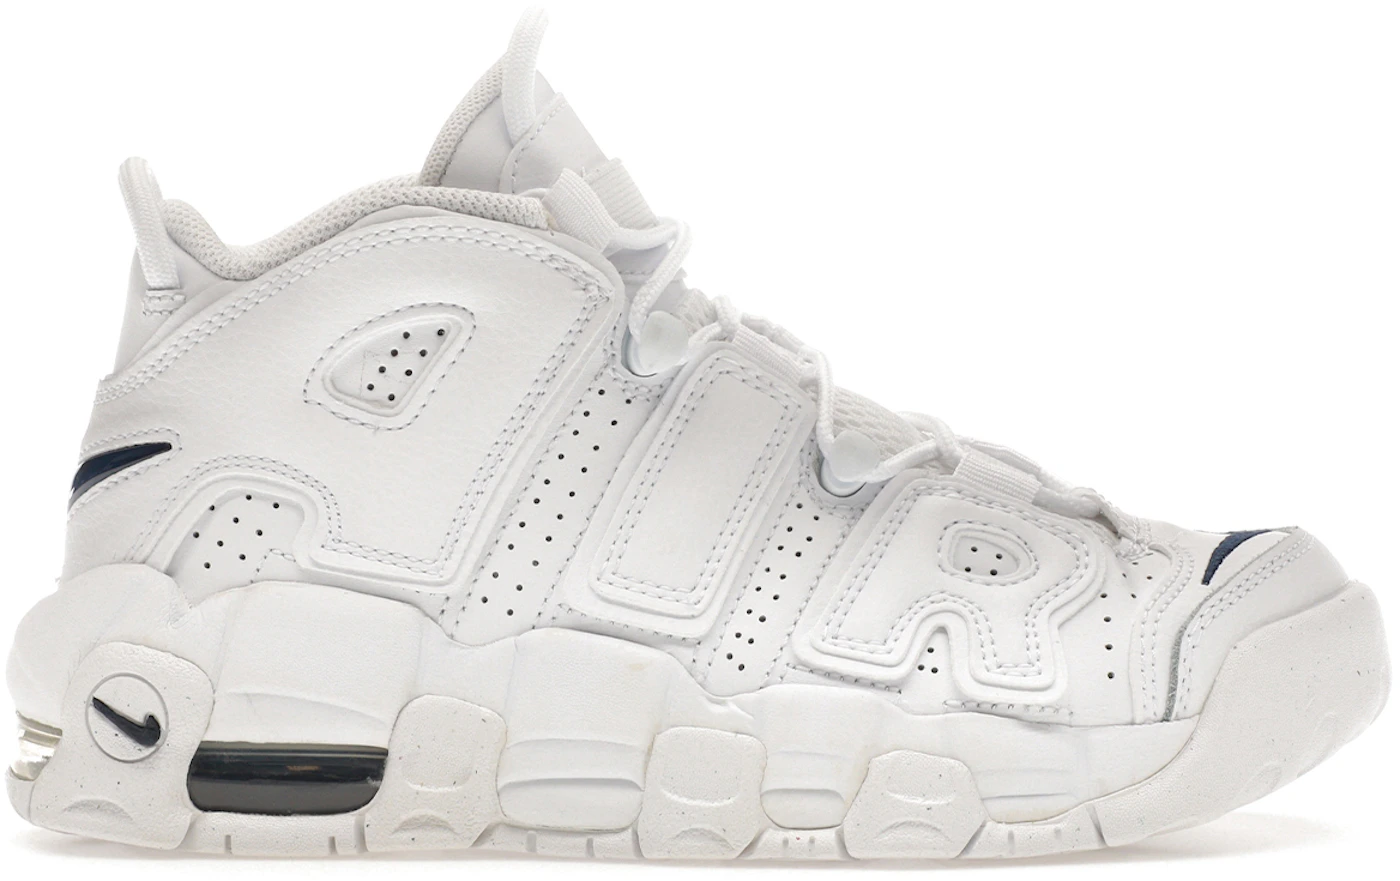 Nike Air More Uptempo White Kids\' - DH9719-100 Midnight (GS) Navy US 